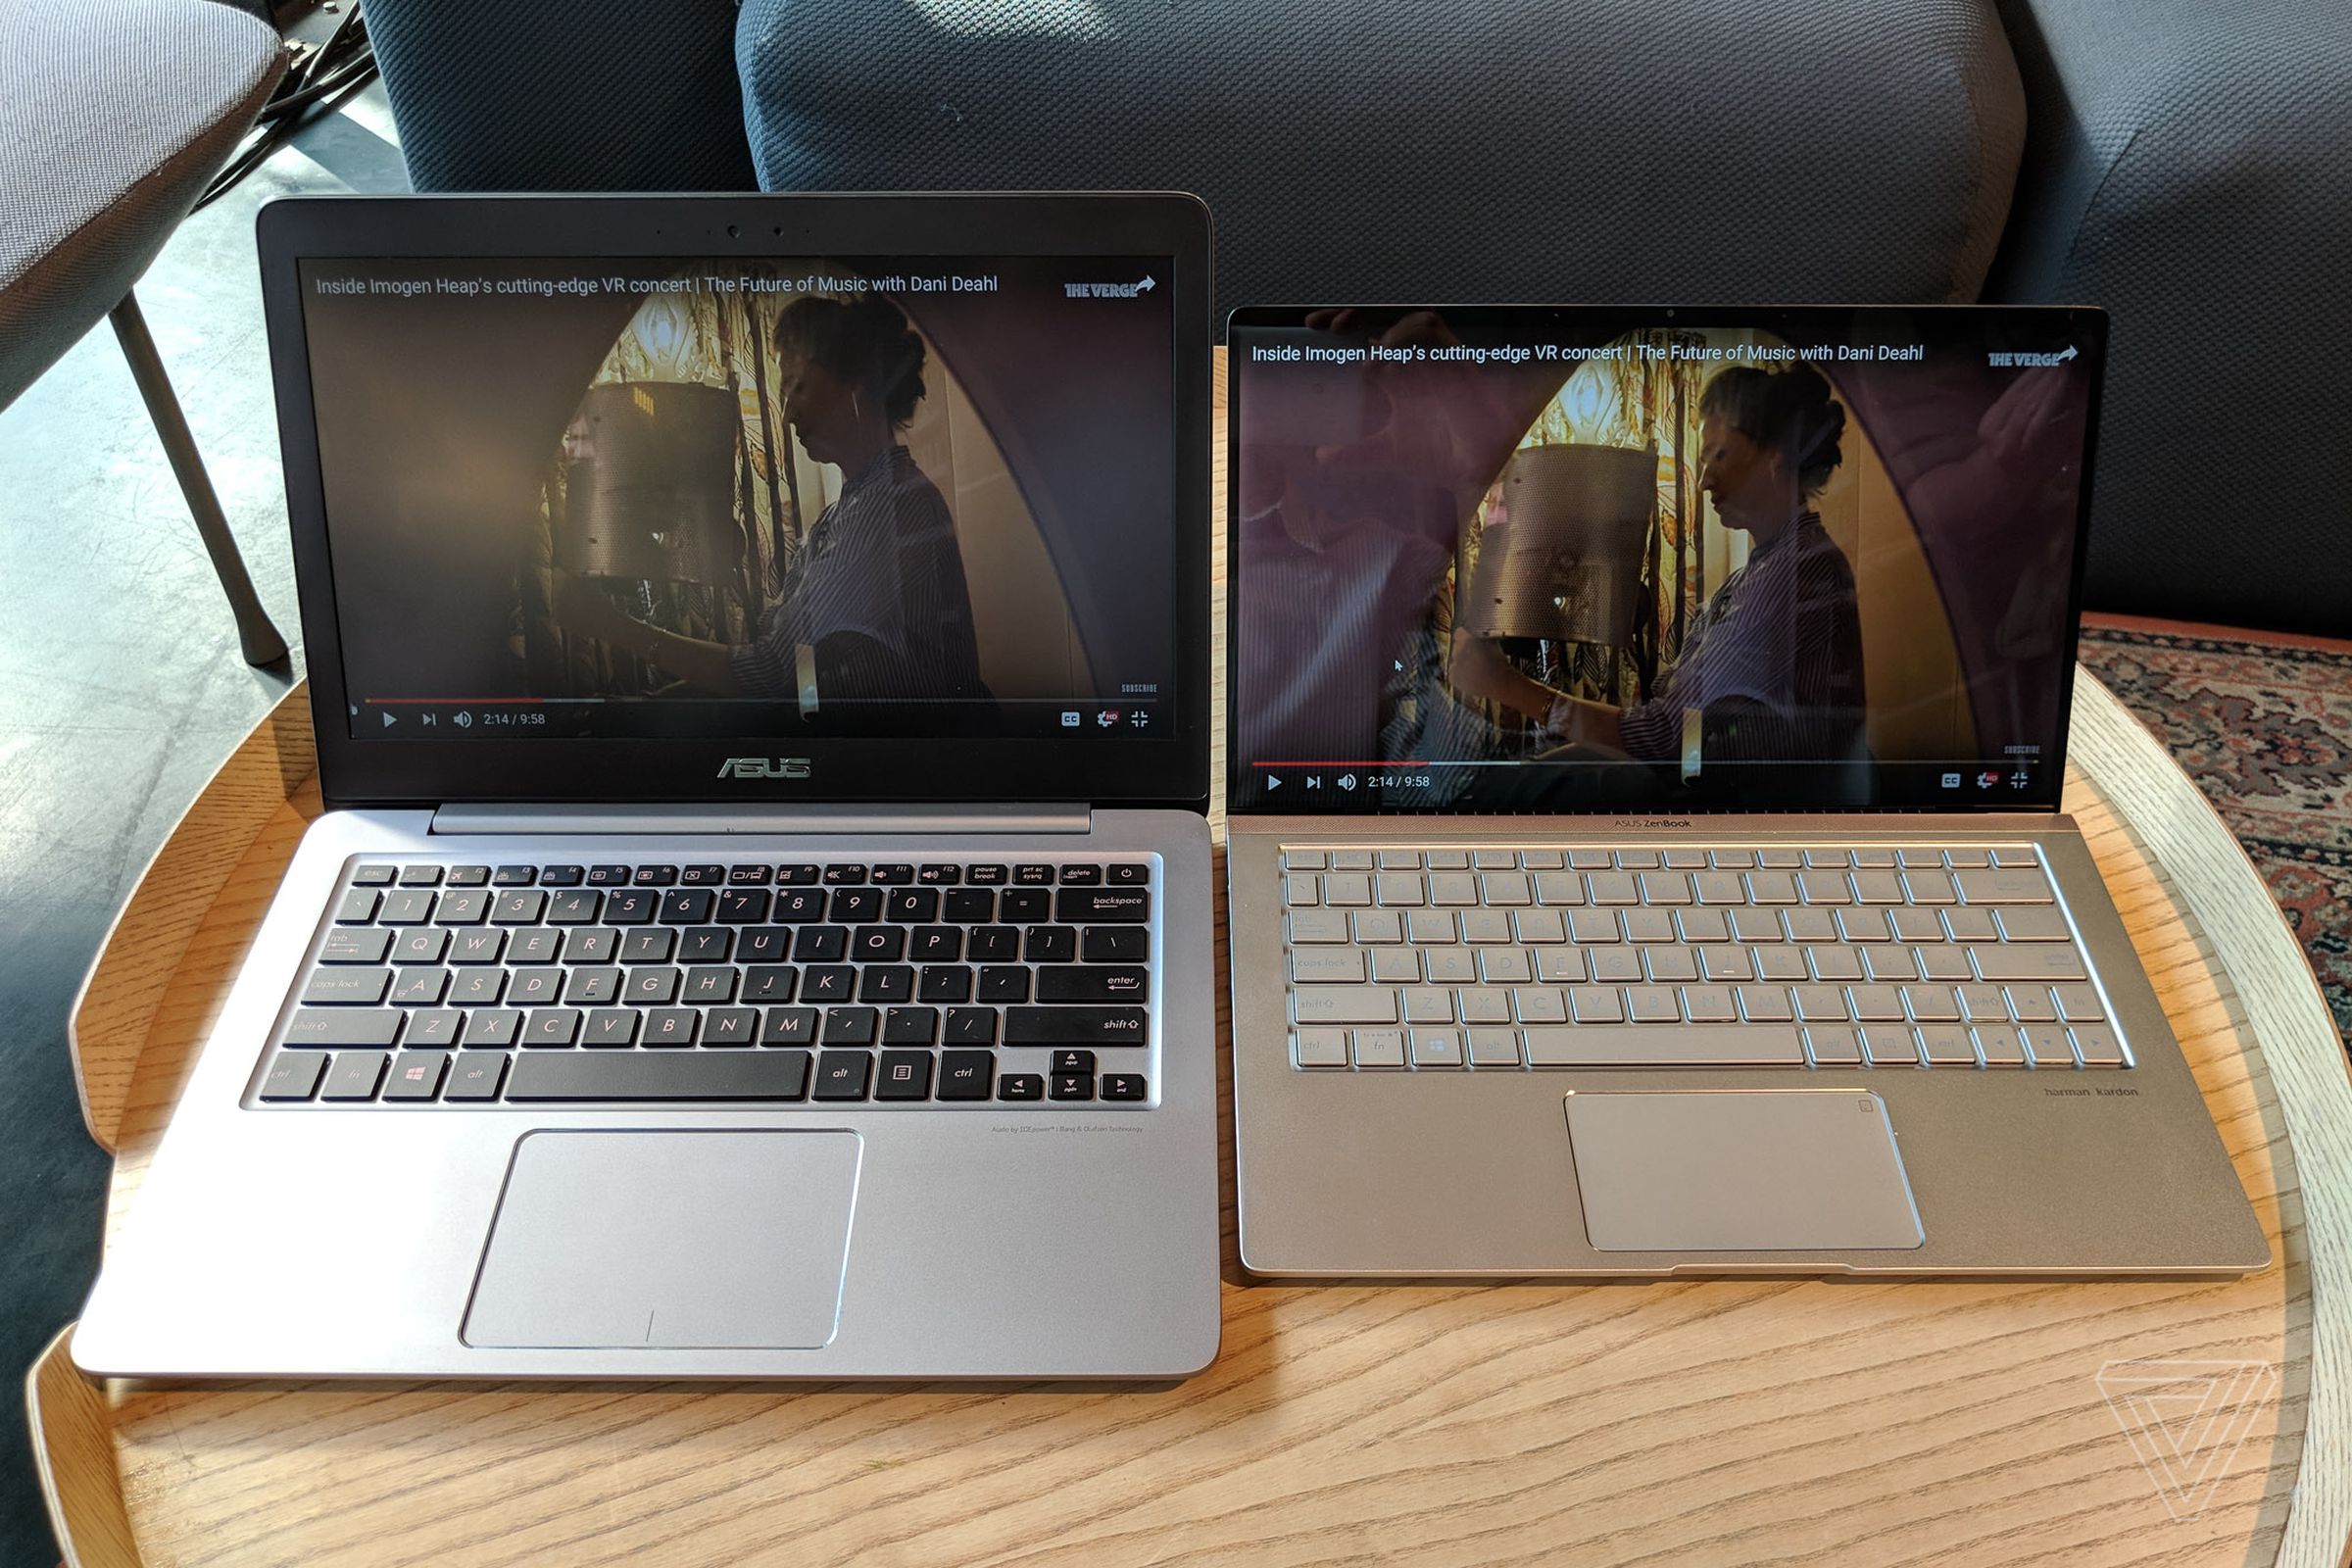 2017’s ZenBook 13, on the left, next to the new ZenBook 13, on the right. Same screen size.